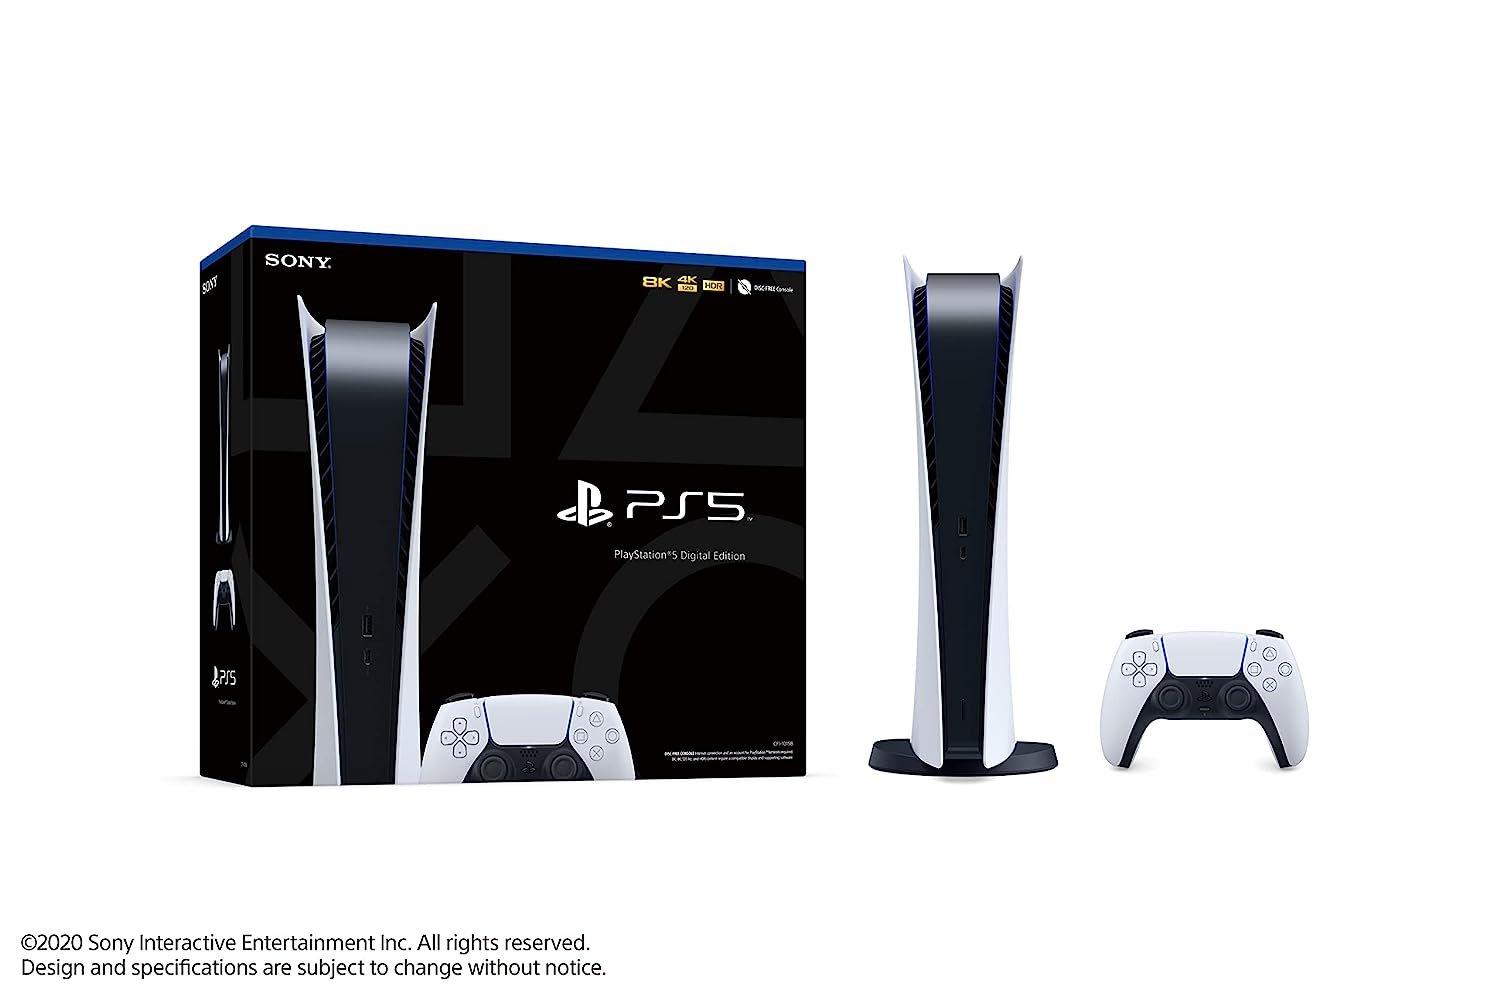 Sony PlayStation 5 Used Digital Console with Accessories Kit (PS5 Digital  Version) 